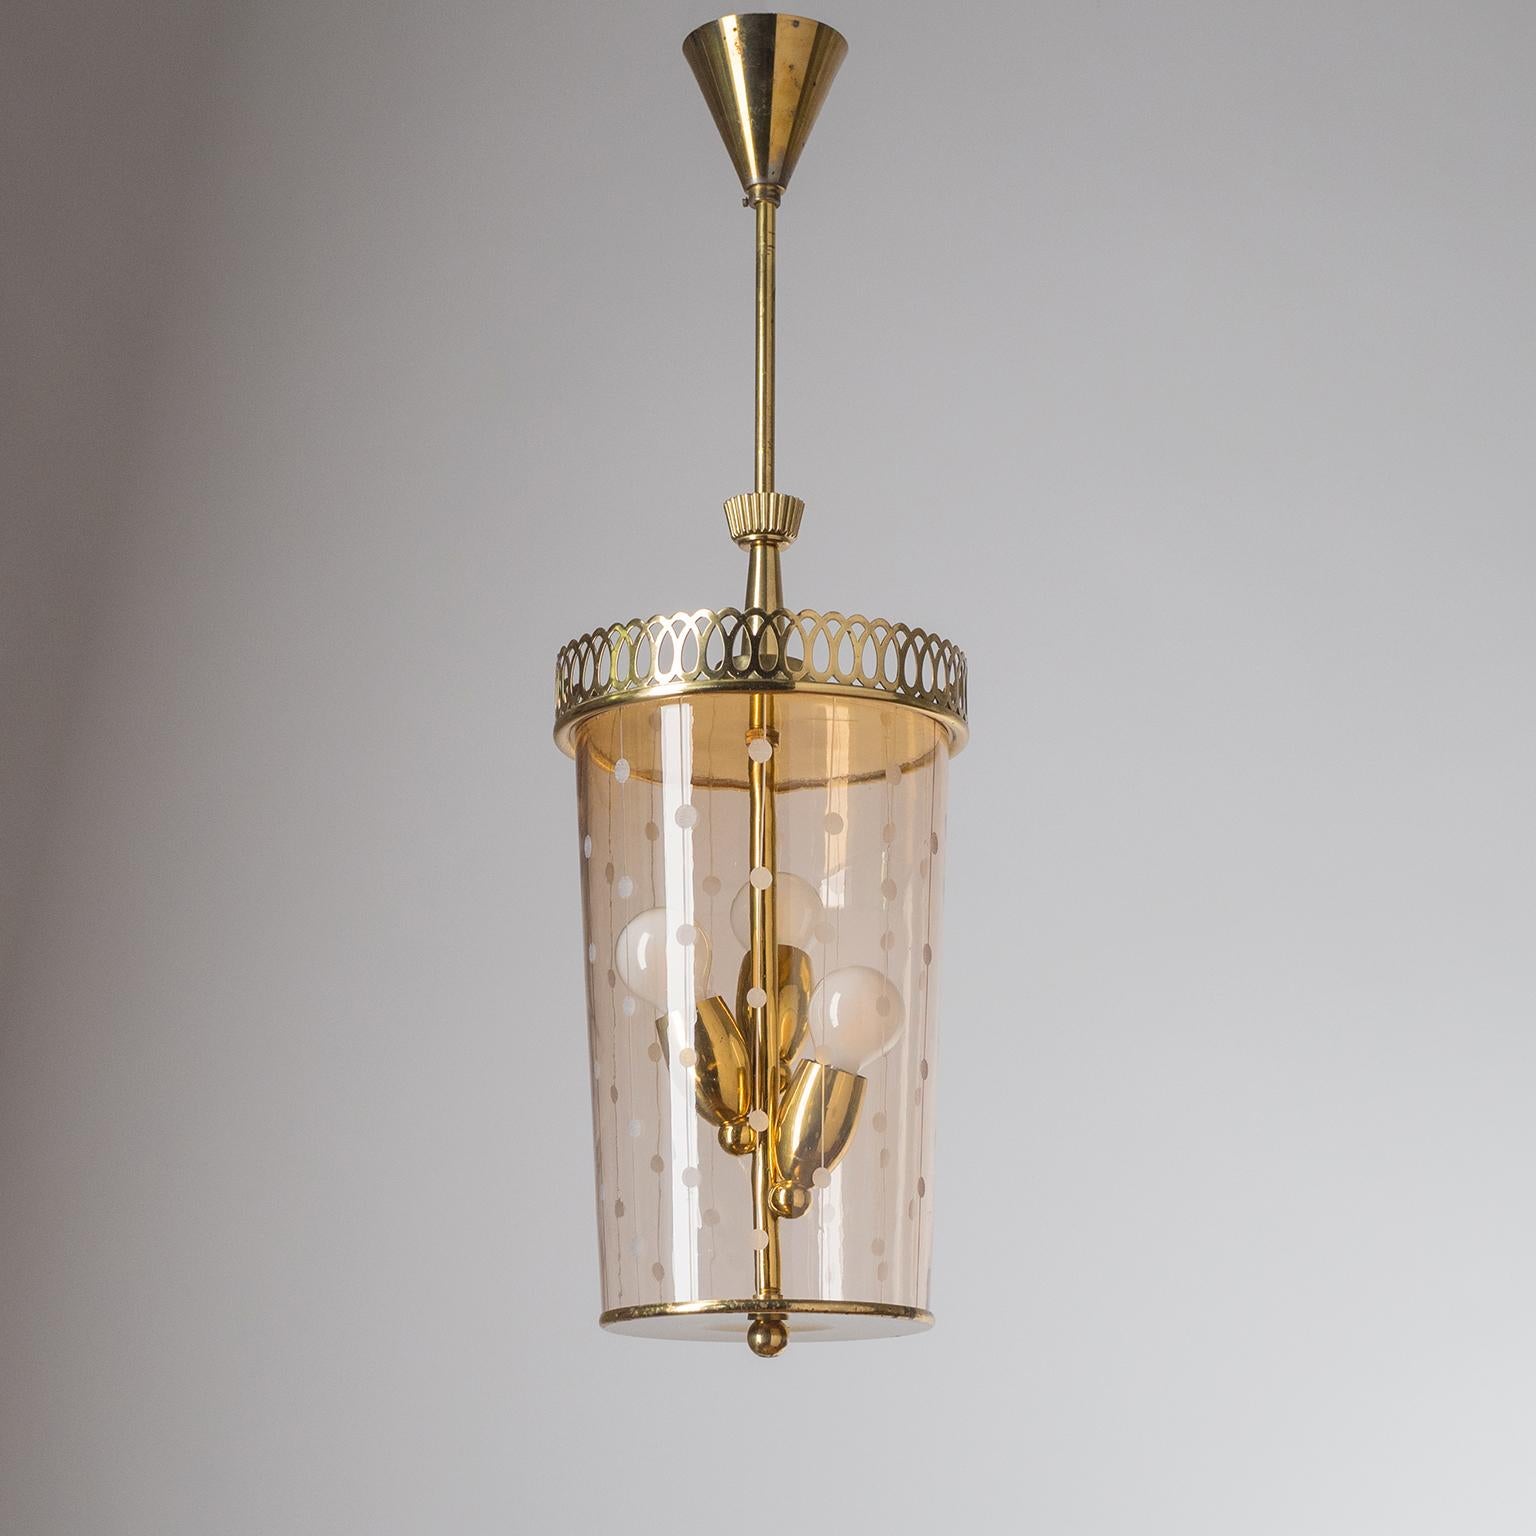 Rare brass lantern from the 1940-1950s. Lovely detailed brass elements with a rosé-tinted blown glass body with etched and cut decorations. Three original brass E14 sockets. Height without the stem is 16inches/41cm.